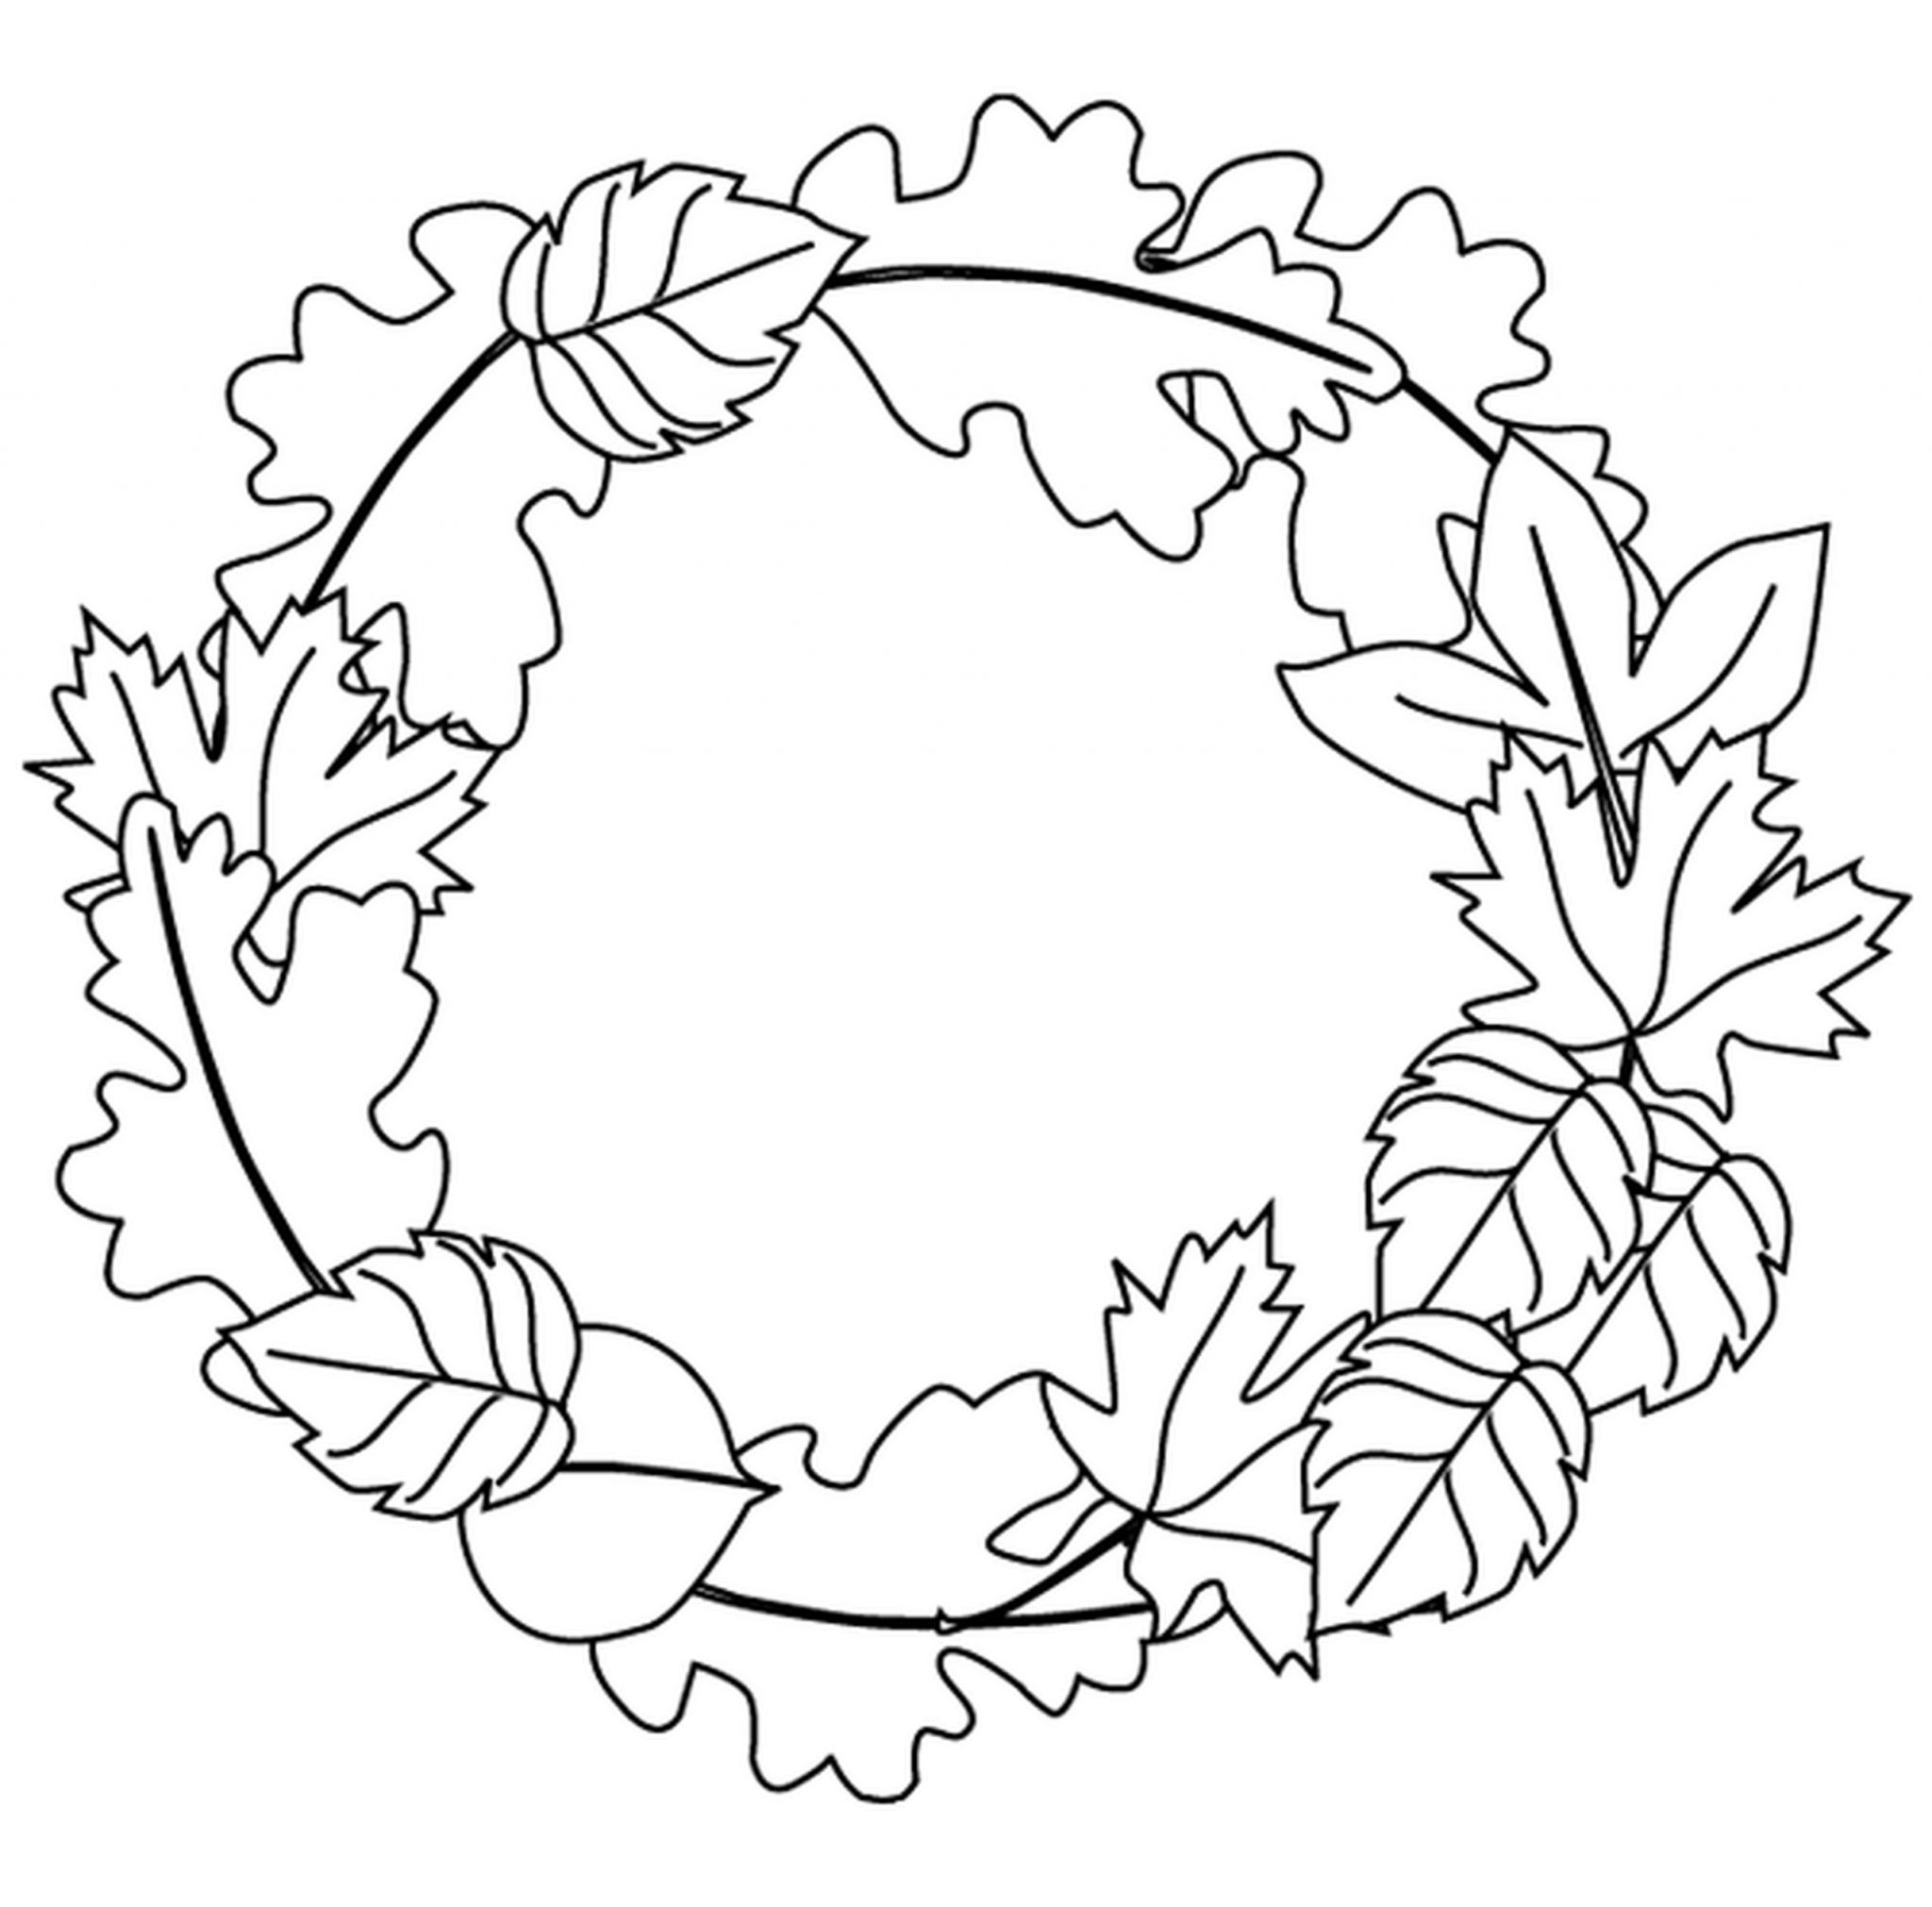 Download easy-preschool-fall-leaves-coloring-pages ...